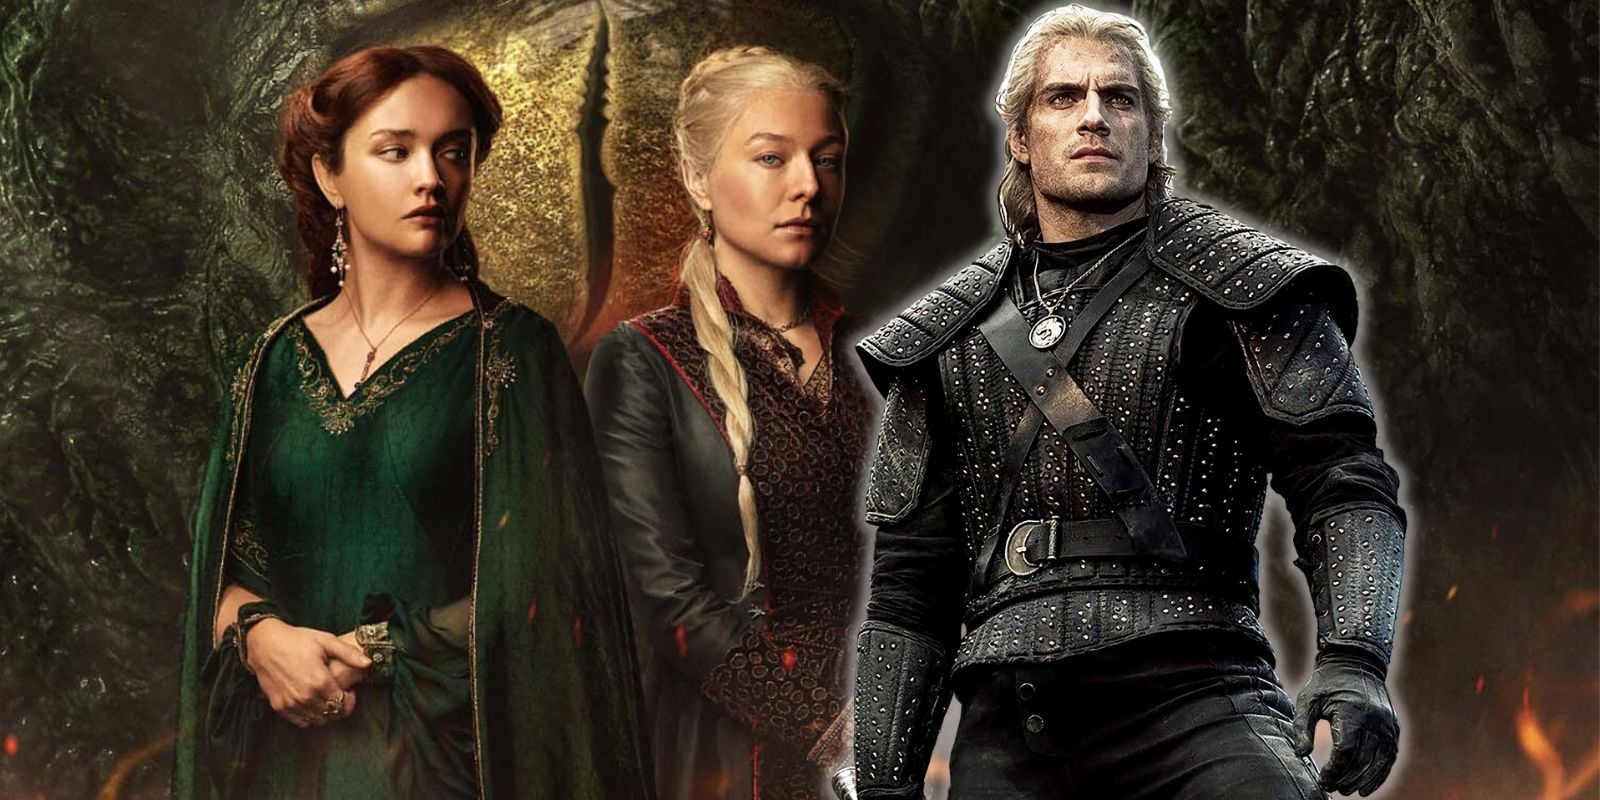 Alicent Hightower and Rhaenyra Targaryen of House of the Dragon stand next to Geralt of Rivia